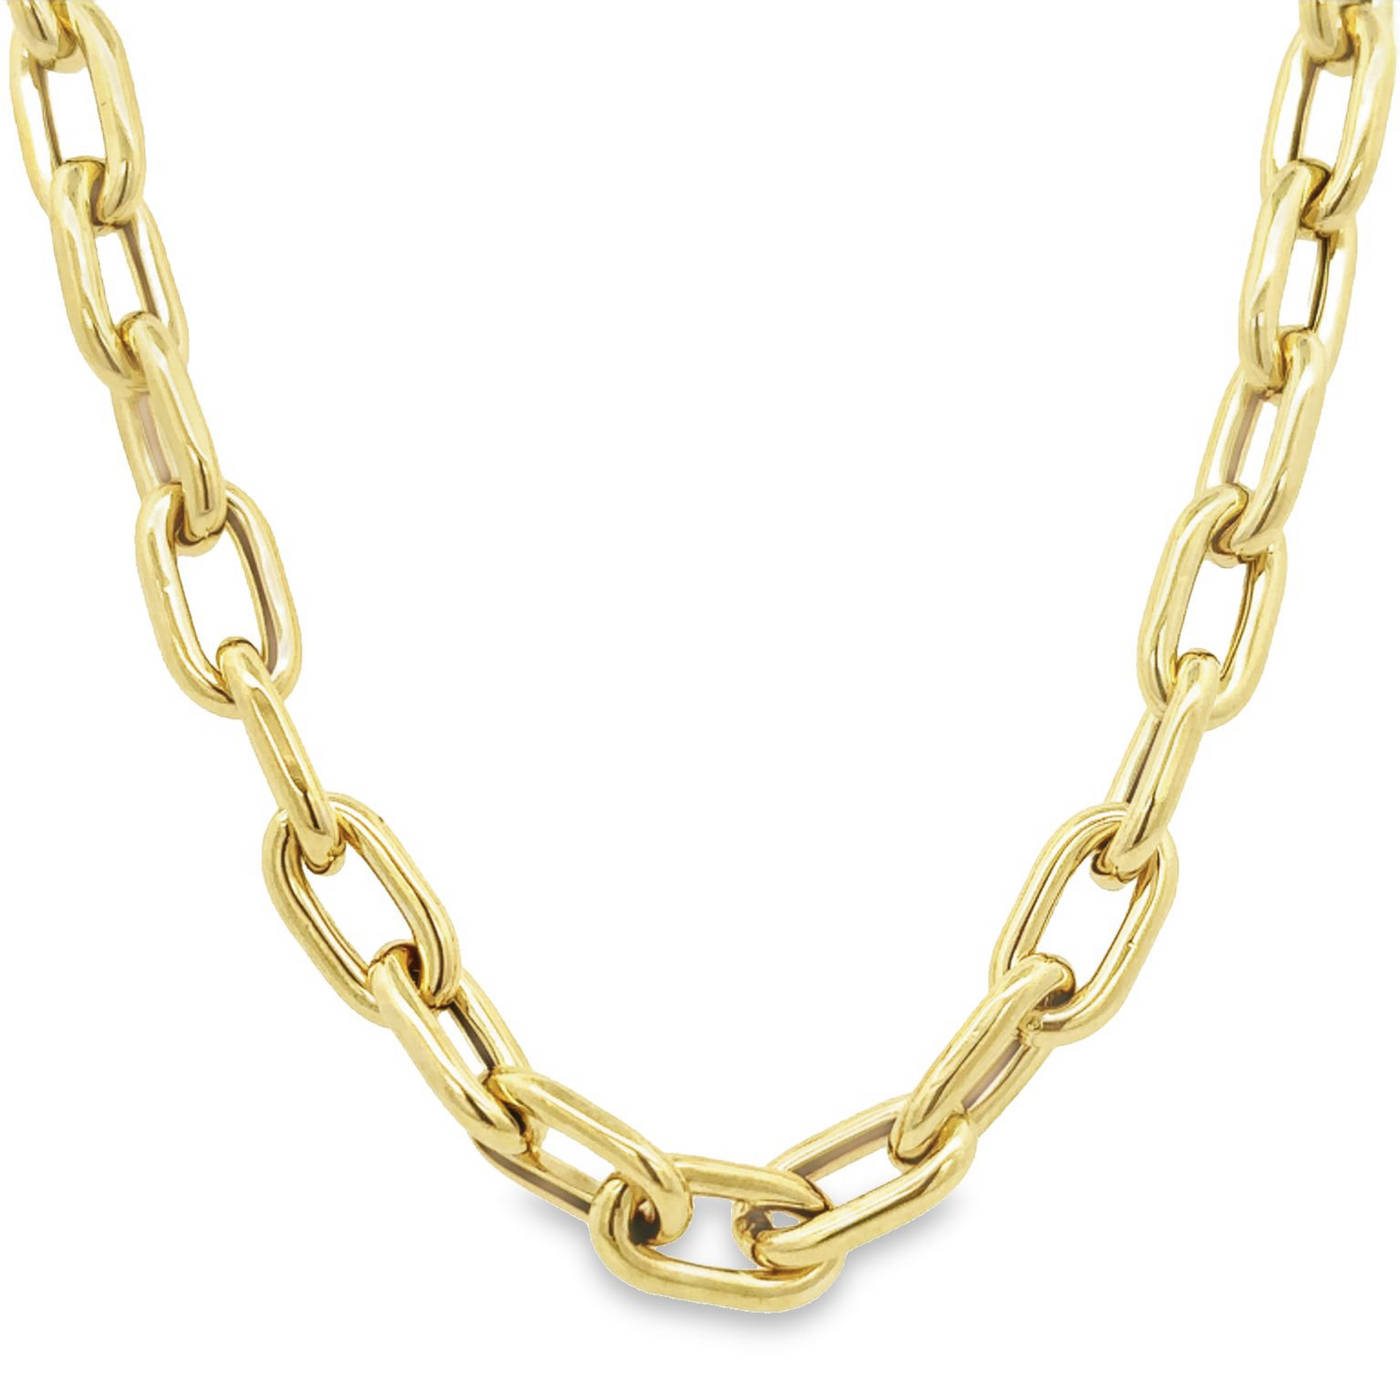 14 Karat Yellow Gold 20" Smooth Open Link Chain Necklace